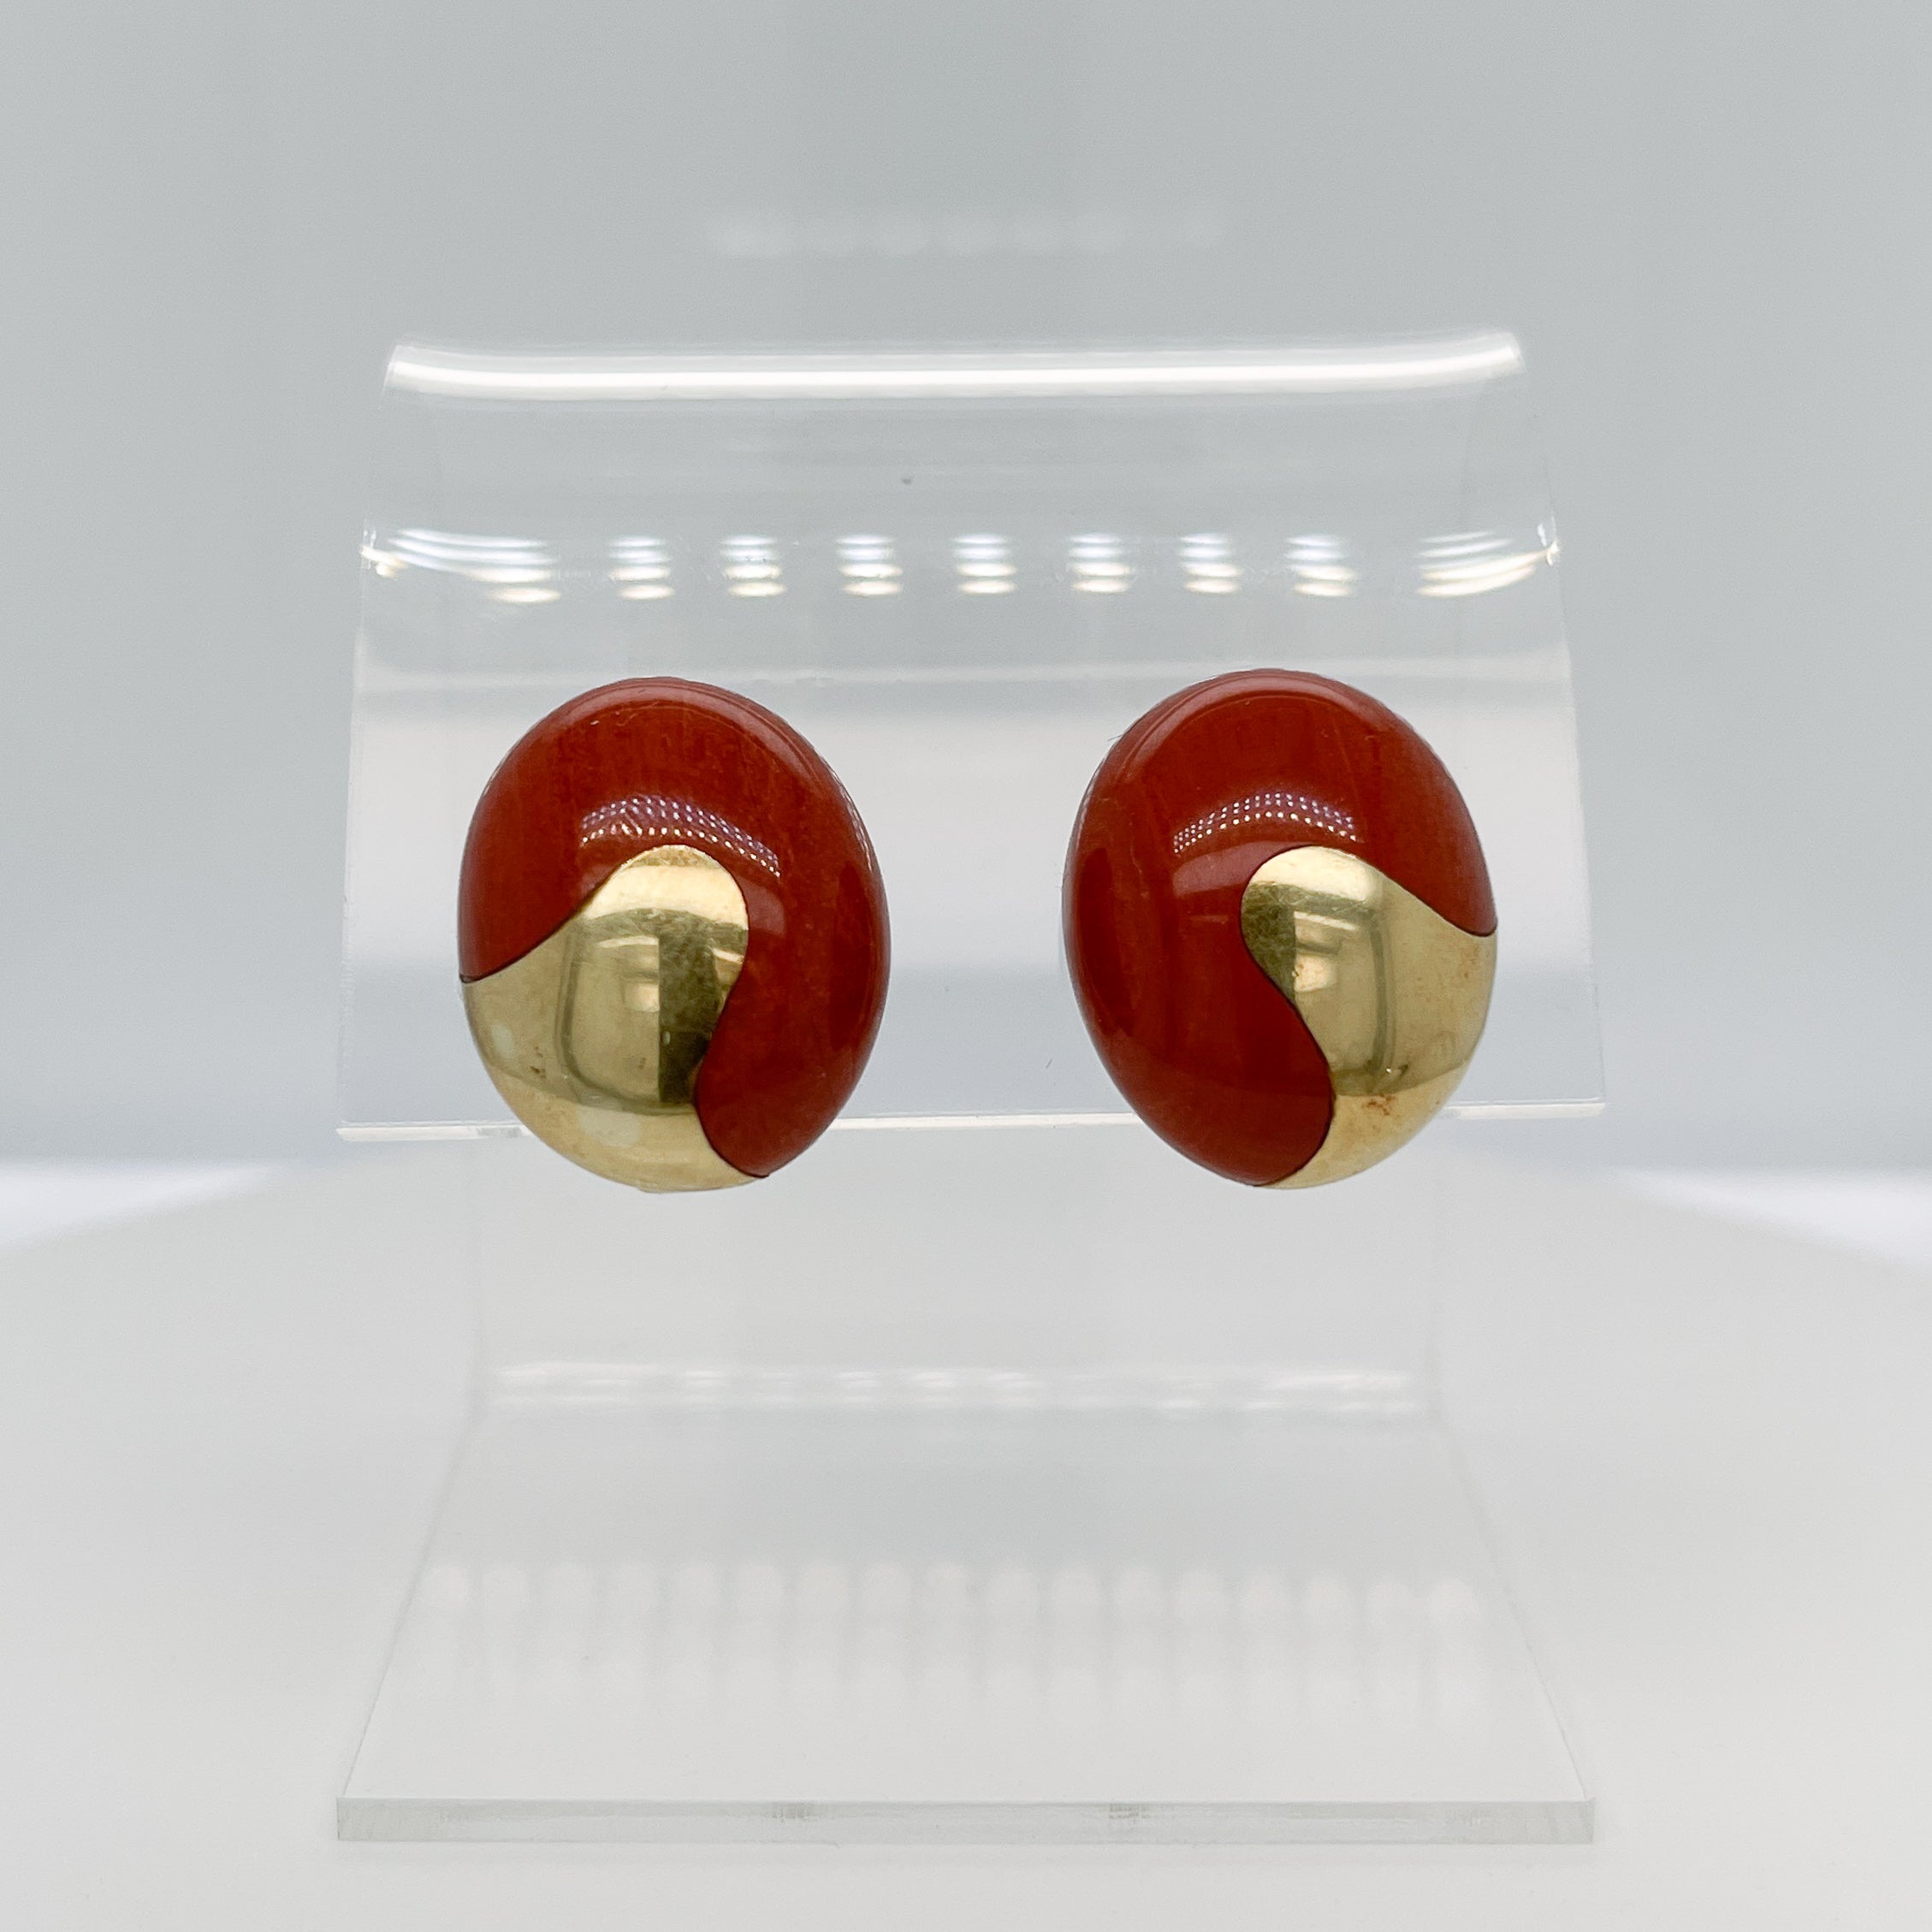 A fine pair of modern Angela Cummings attributed cabochon clip-on earrings.

With red jasper cabochons inlaid with 18K gold elements.

Purchased in a collection together with several signed Tiffany & Co. pairs of Angela Cummings earrings. We wonder